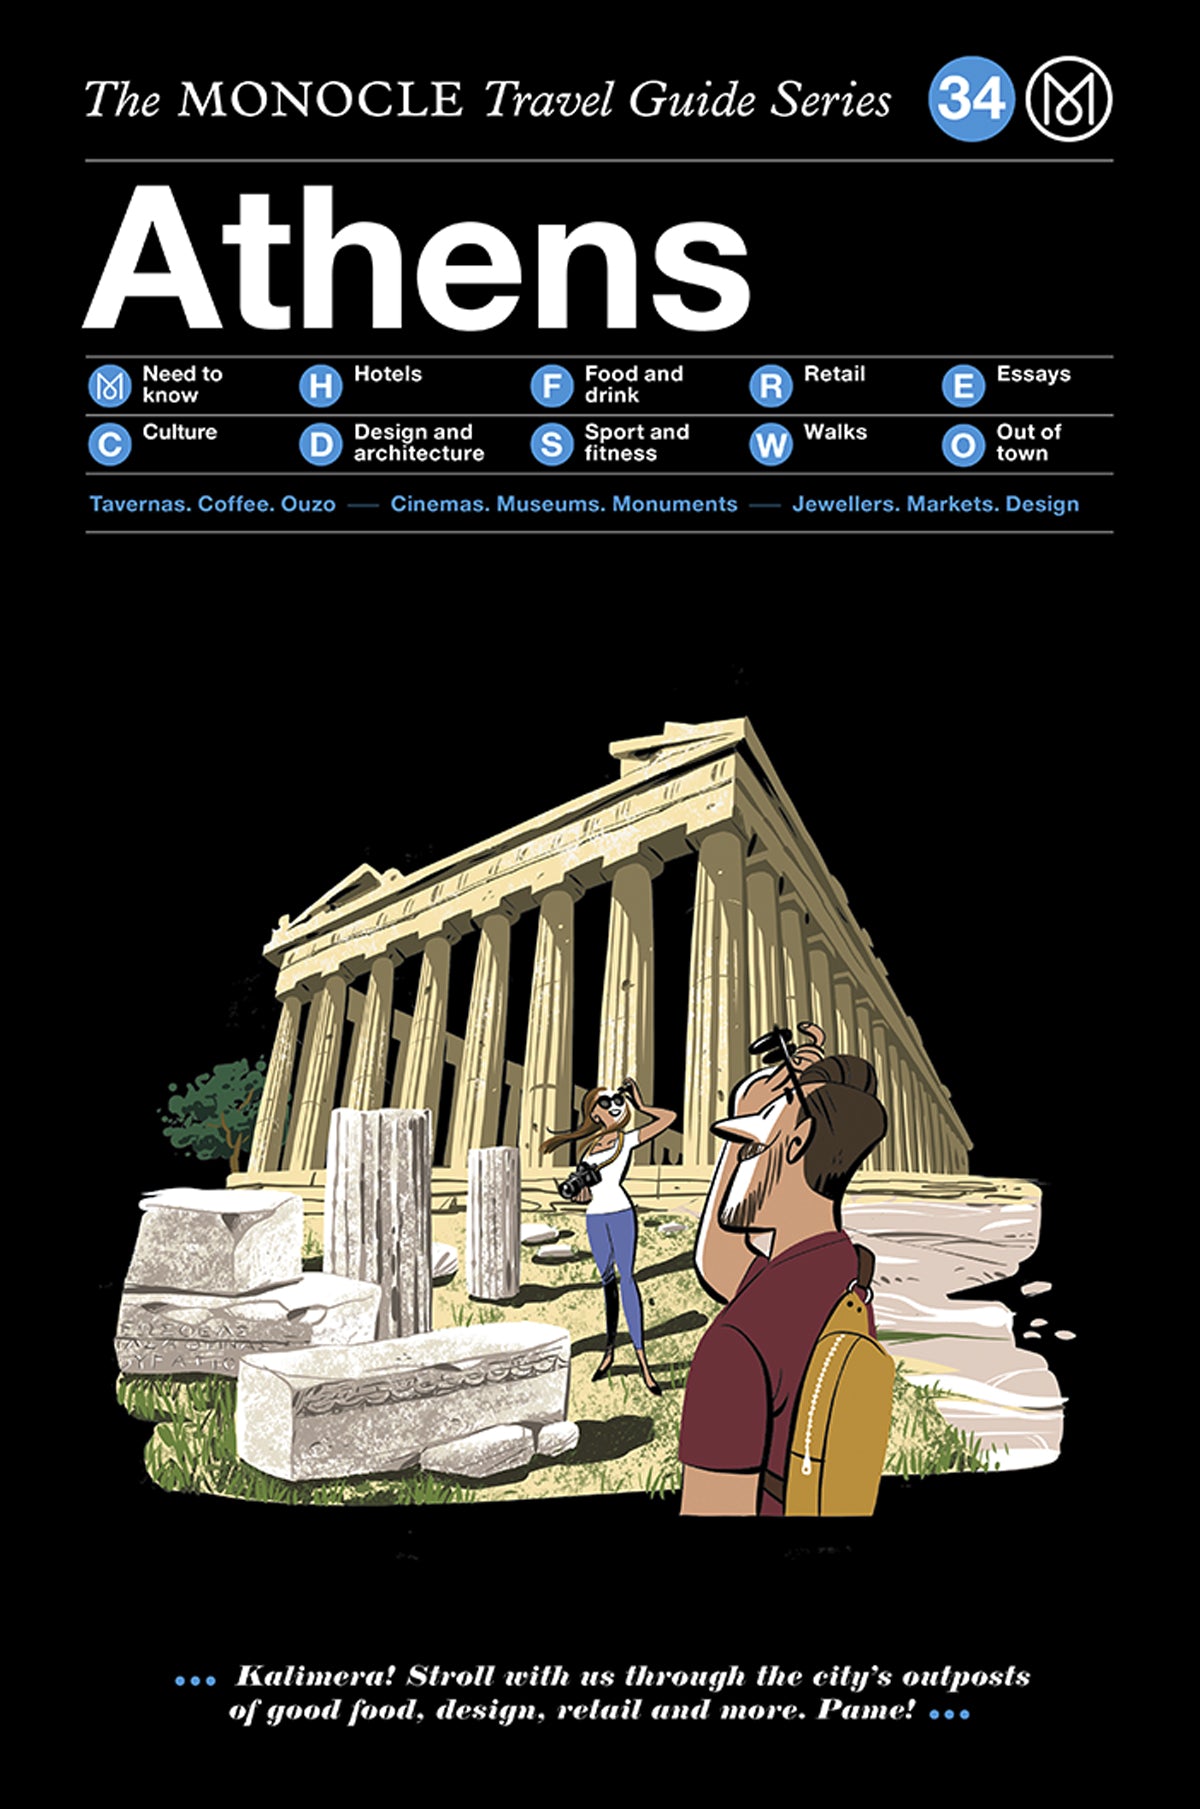 Athens: The Monocle Travel Guide Series